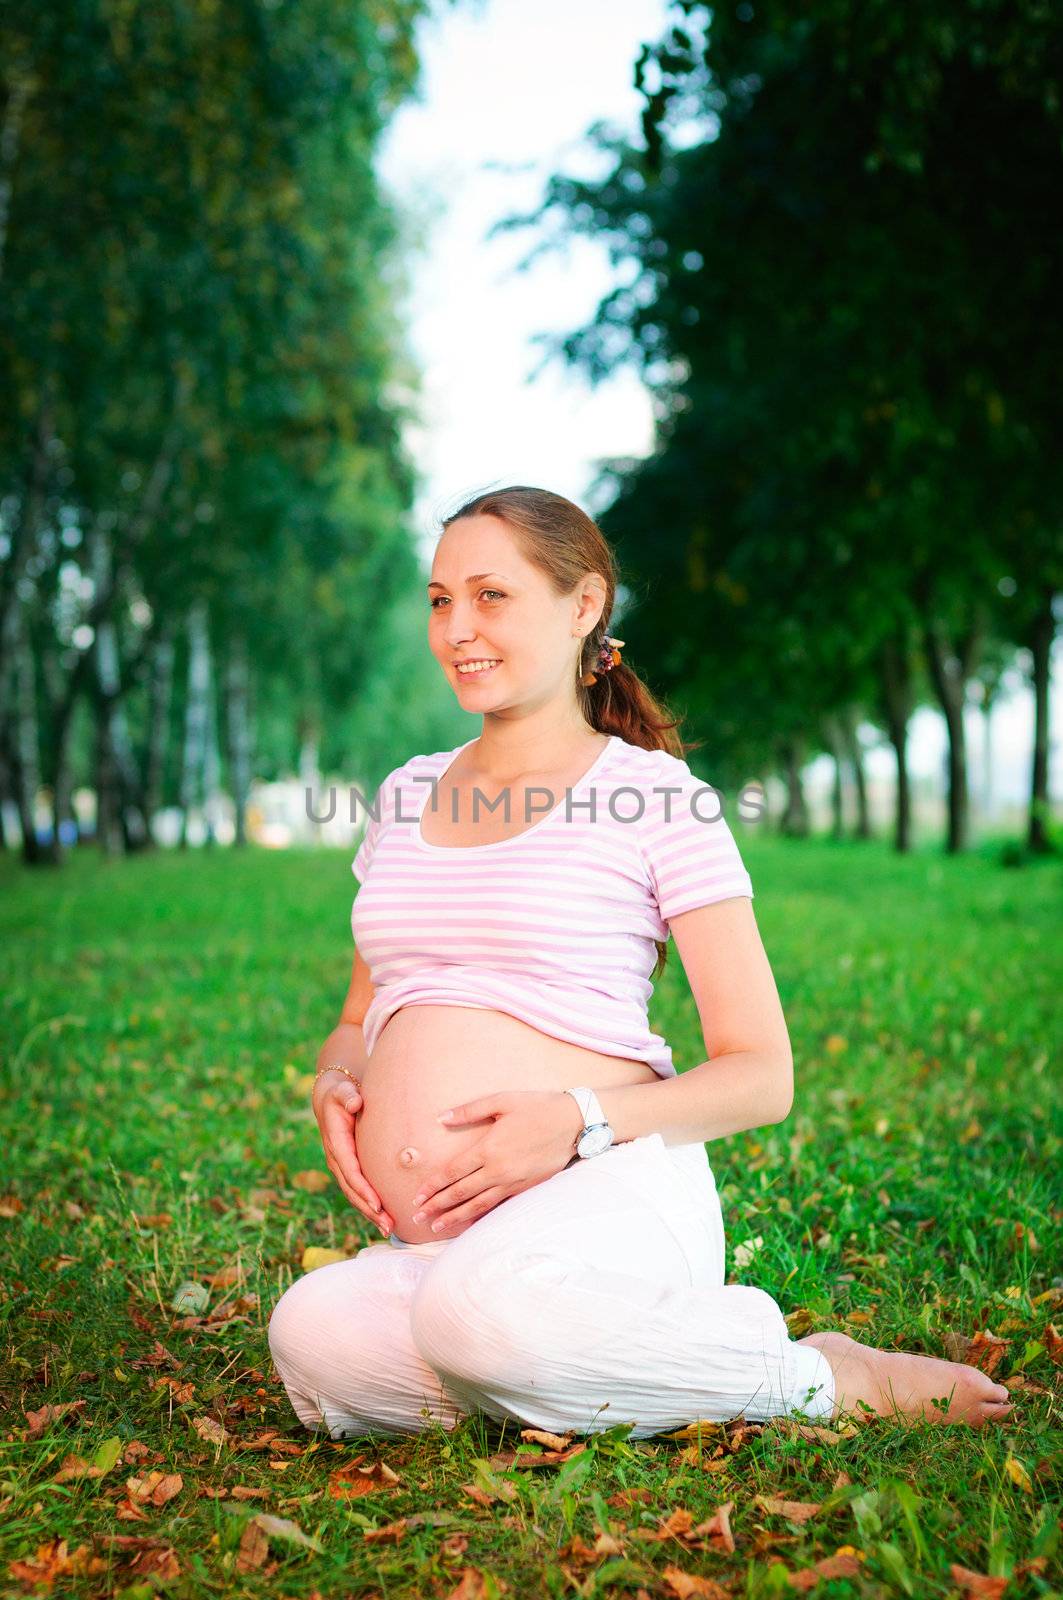 Beautiful pregnant woman relaxing on the grass in the park